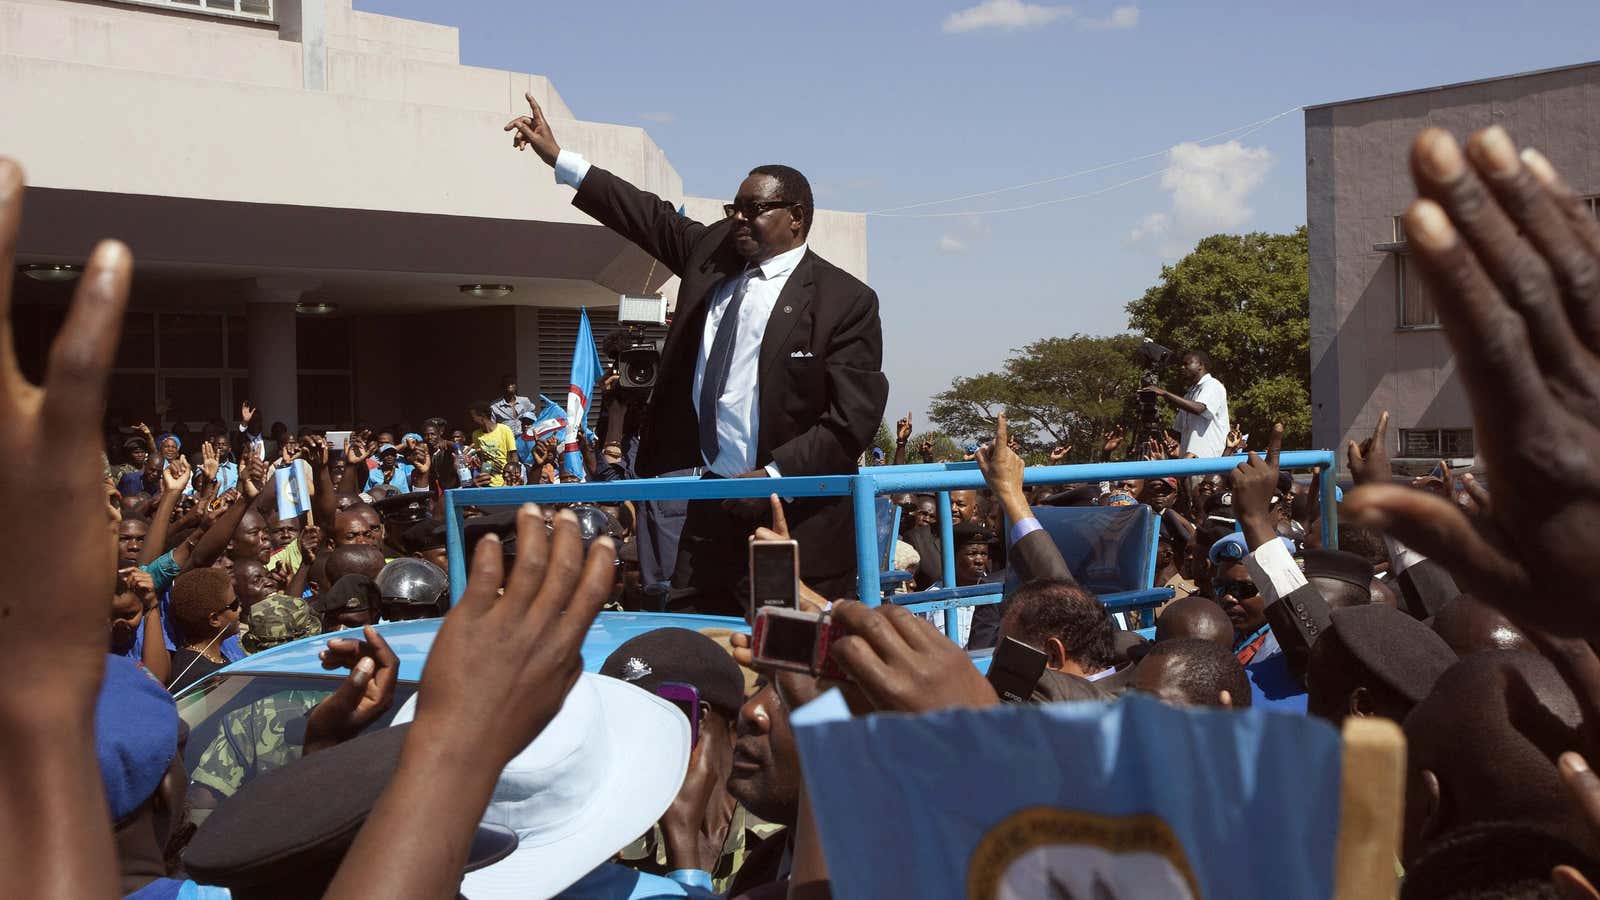 Malawi’s president Peter Mutharika campaigning in 2014.